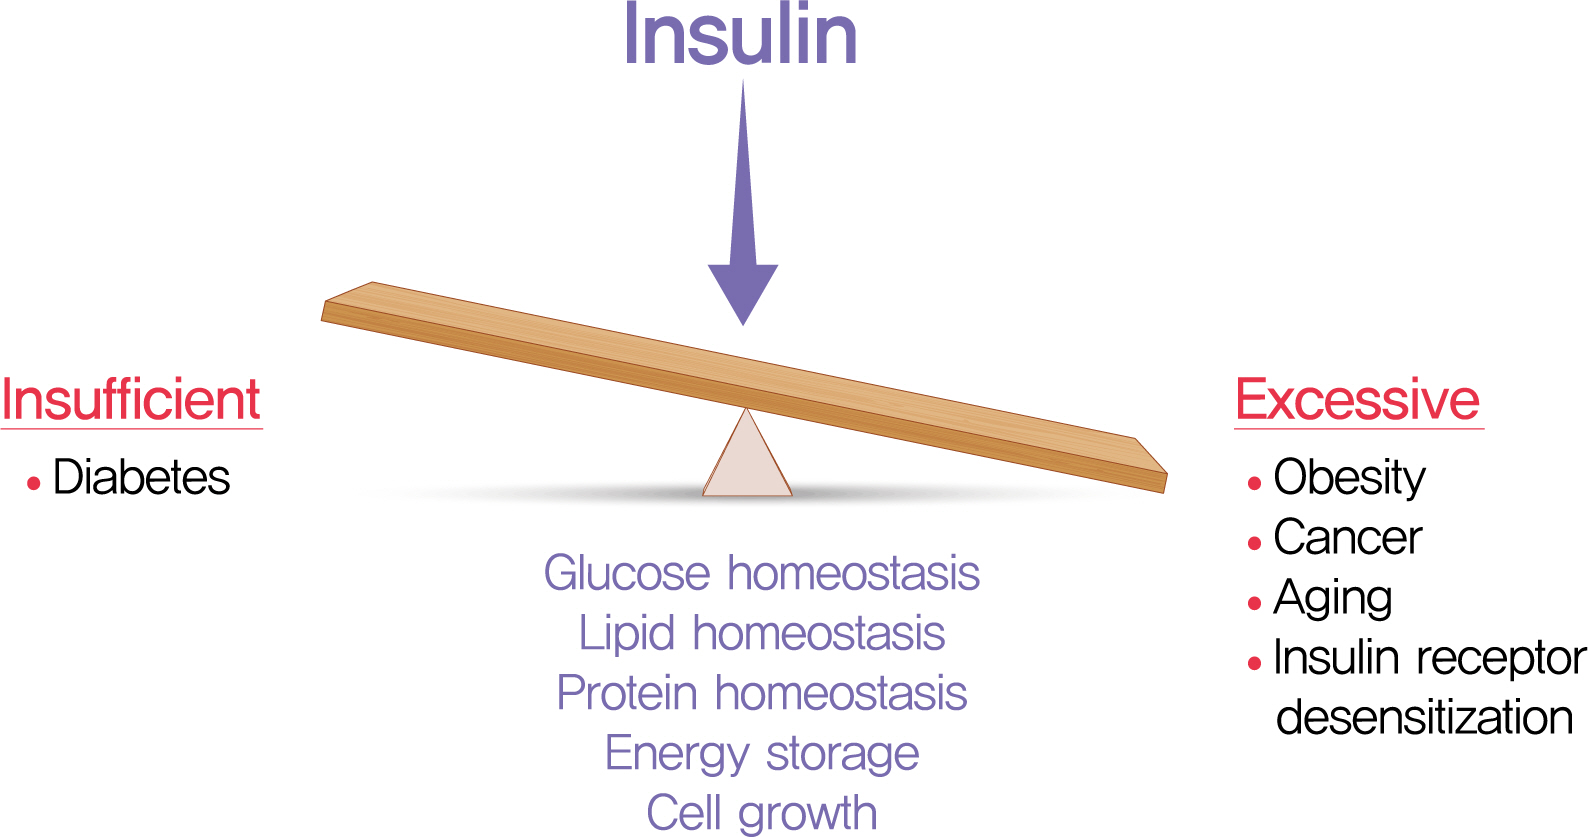 Hyperinsulinemia in Obesity, Inflammation, and Cancer